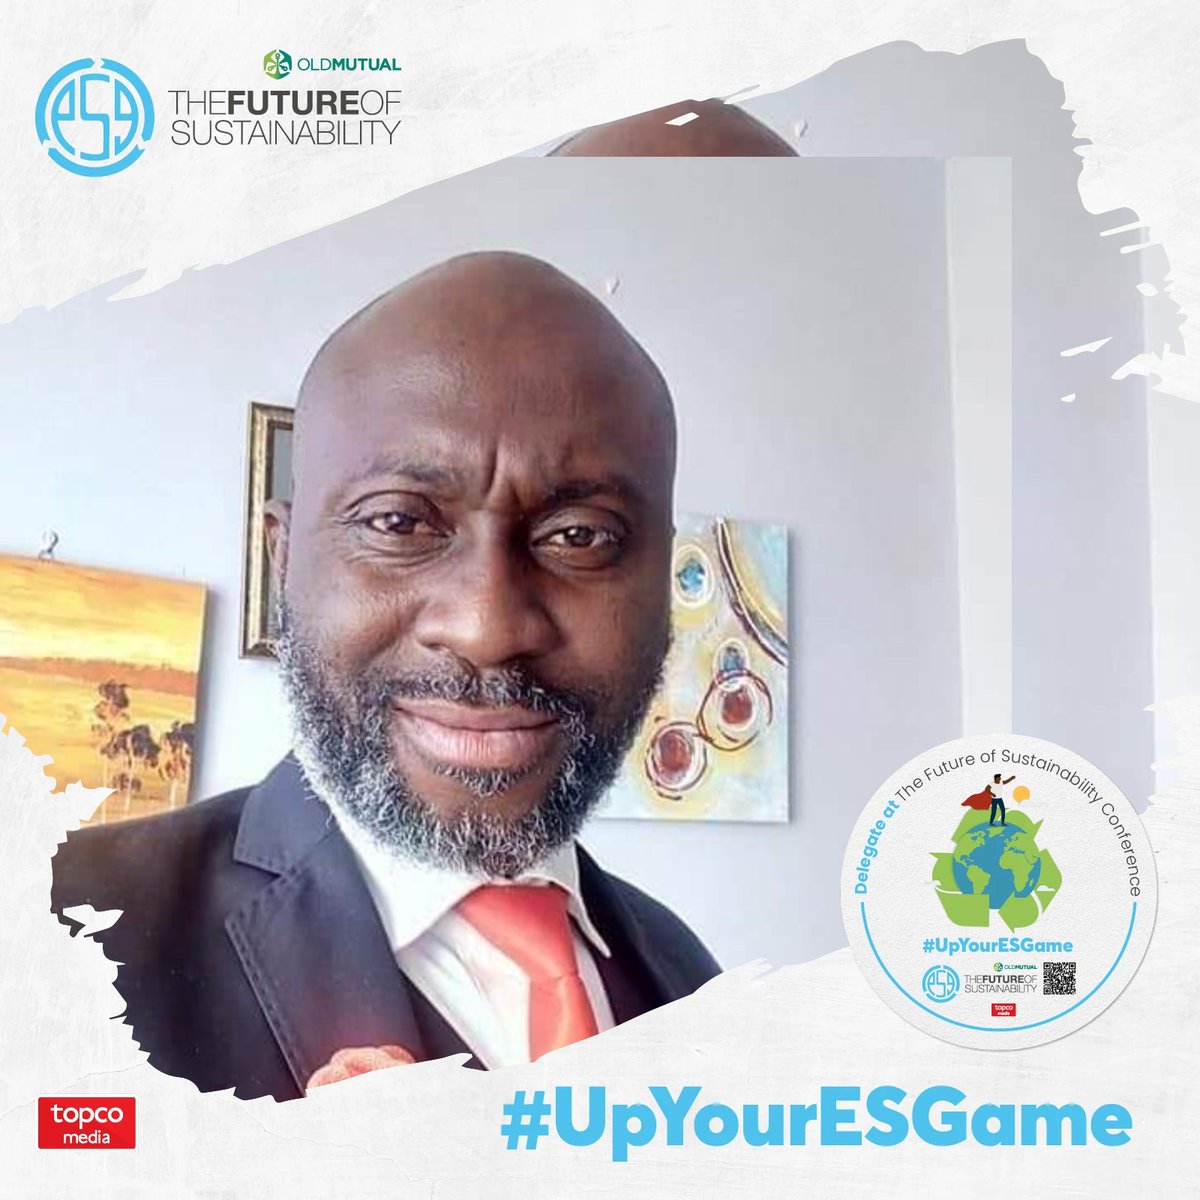 The time for retail transformation is here!!!
Reduce, Reuse, Recycle
#FutureOfSustainability #FOS22 #UpYourESGame #BeAnESGenius